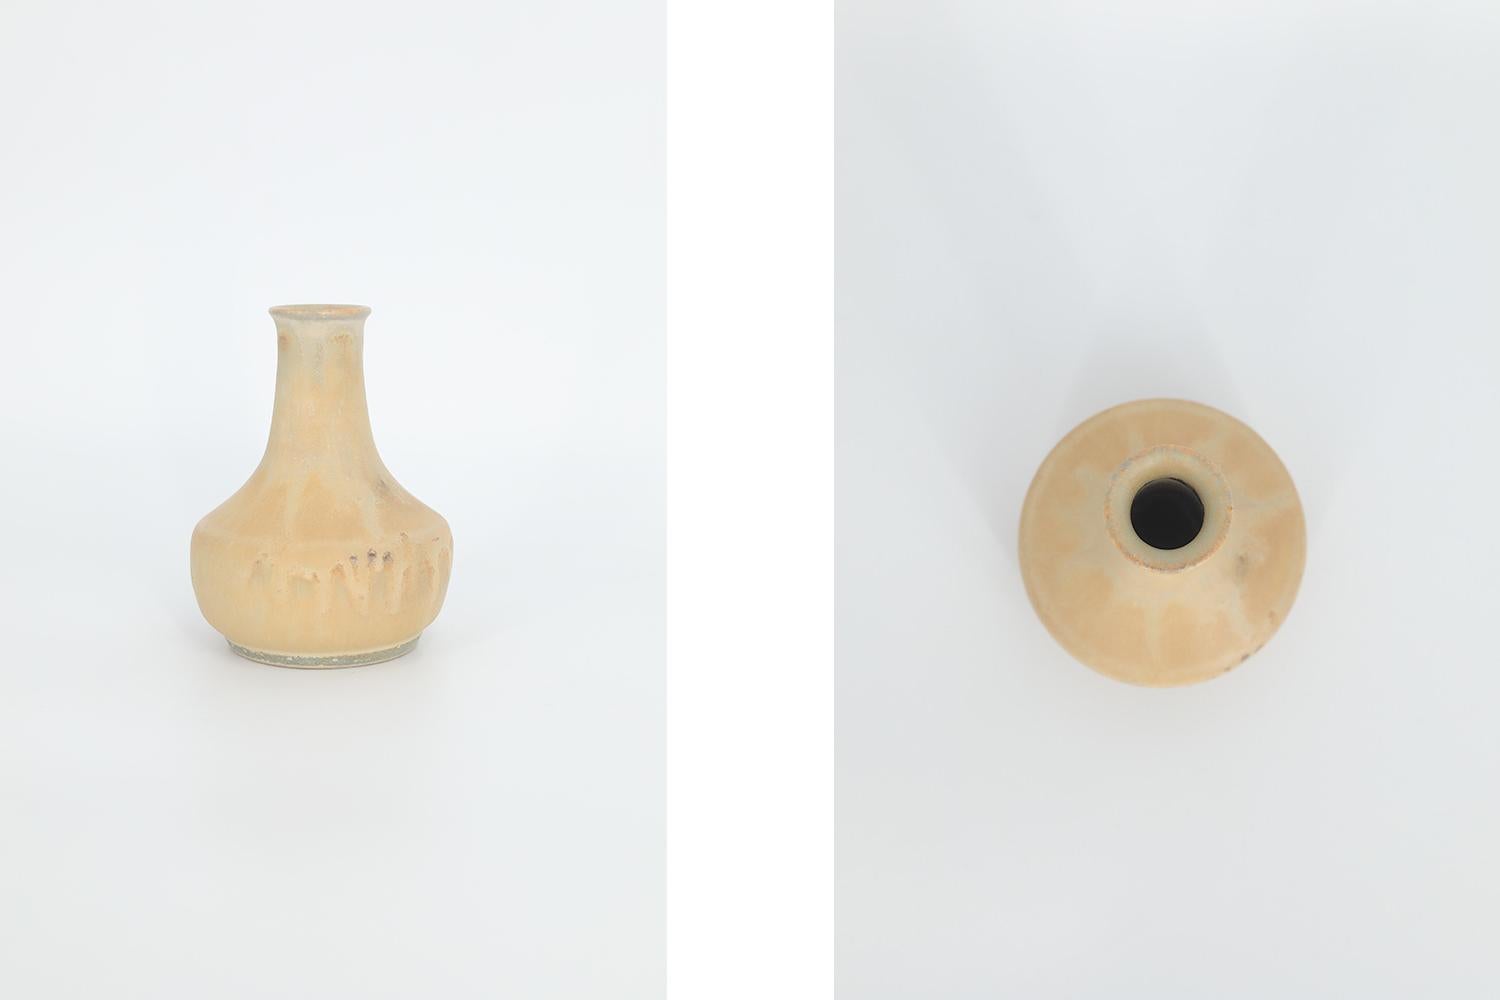 This miniature, collectible stoneware vase was designed by Gunnar Borg for the Swedish manufacture Höganäs Keramik during the 1960s. Handmade by a Master, with the utmost care and attention to details. The vase with an irregular shade of sandy